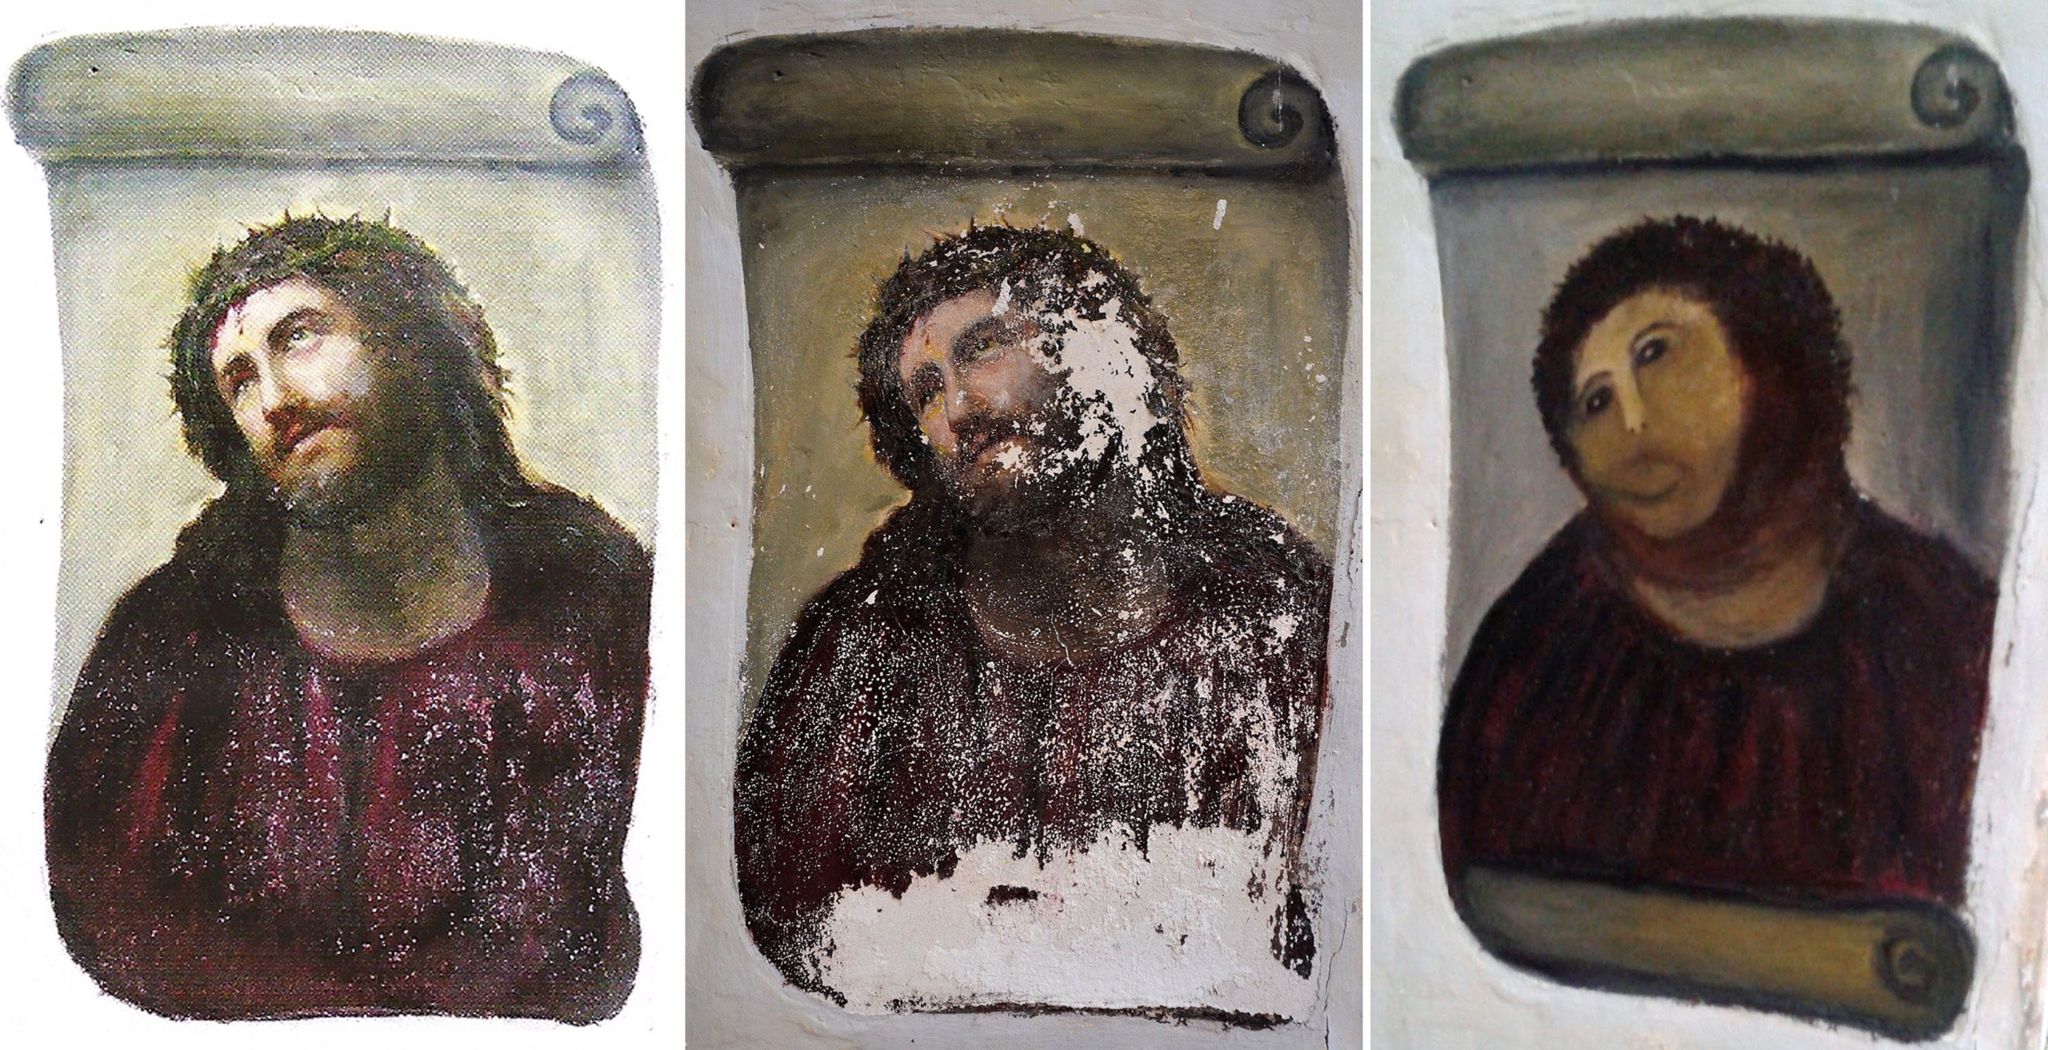 A combination of three documents provided by the Centre de Estudios Borjanos on August 22, 2012 shows the original version of the painting Ecce Homo (L) by 19th-century painter Elias Garcia Martinez, the deteriorated version (C) and the restored version by an elderly woman in Spain.